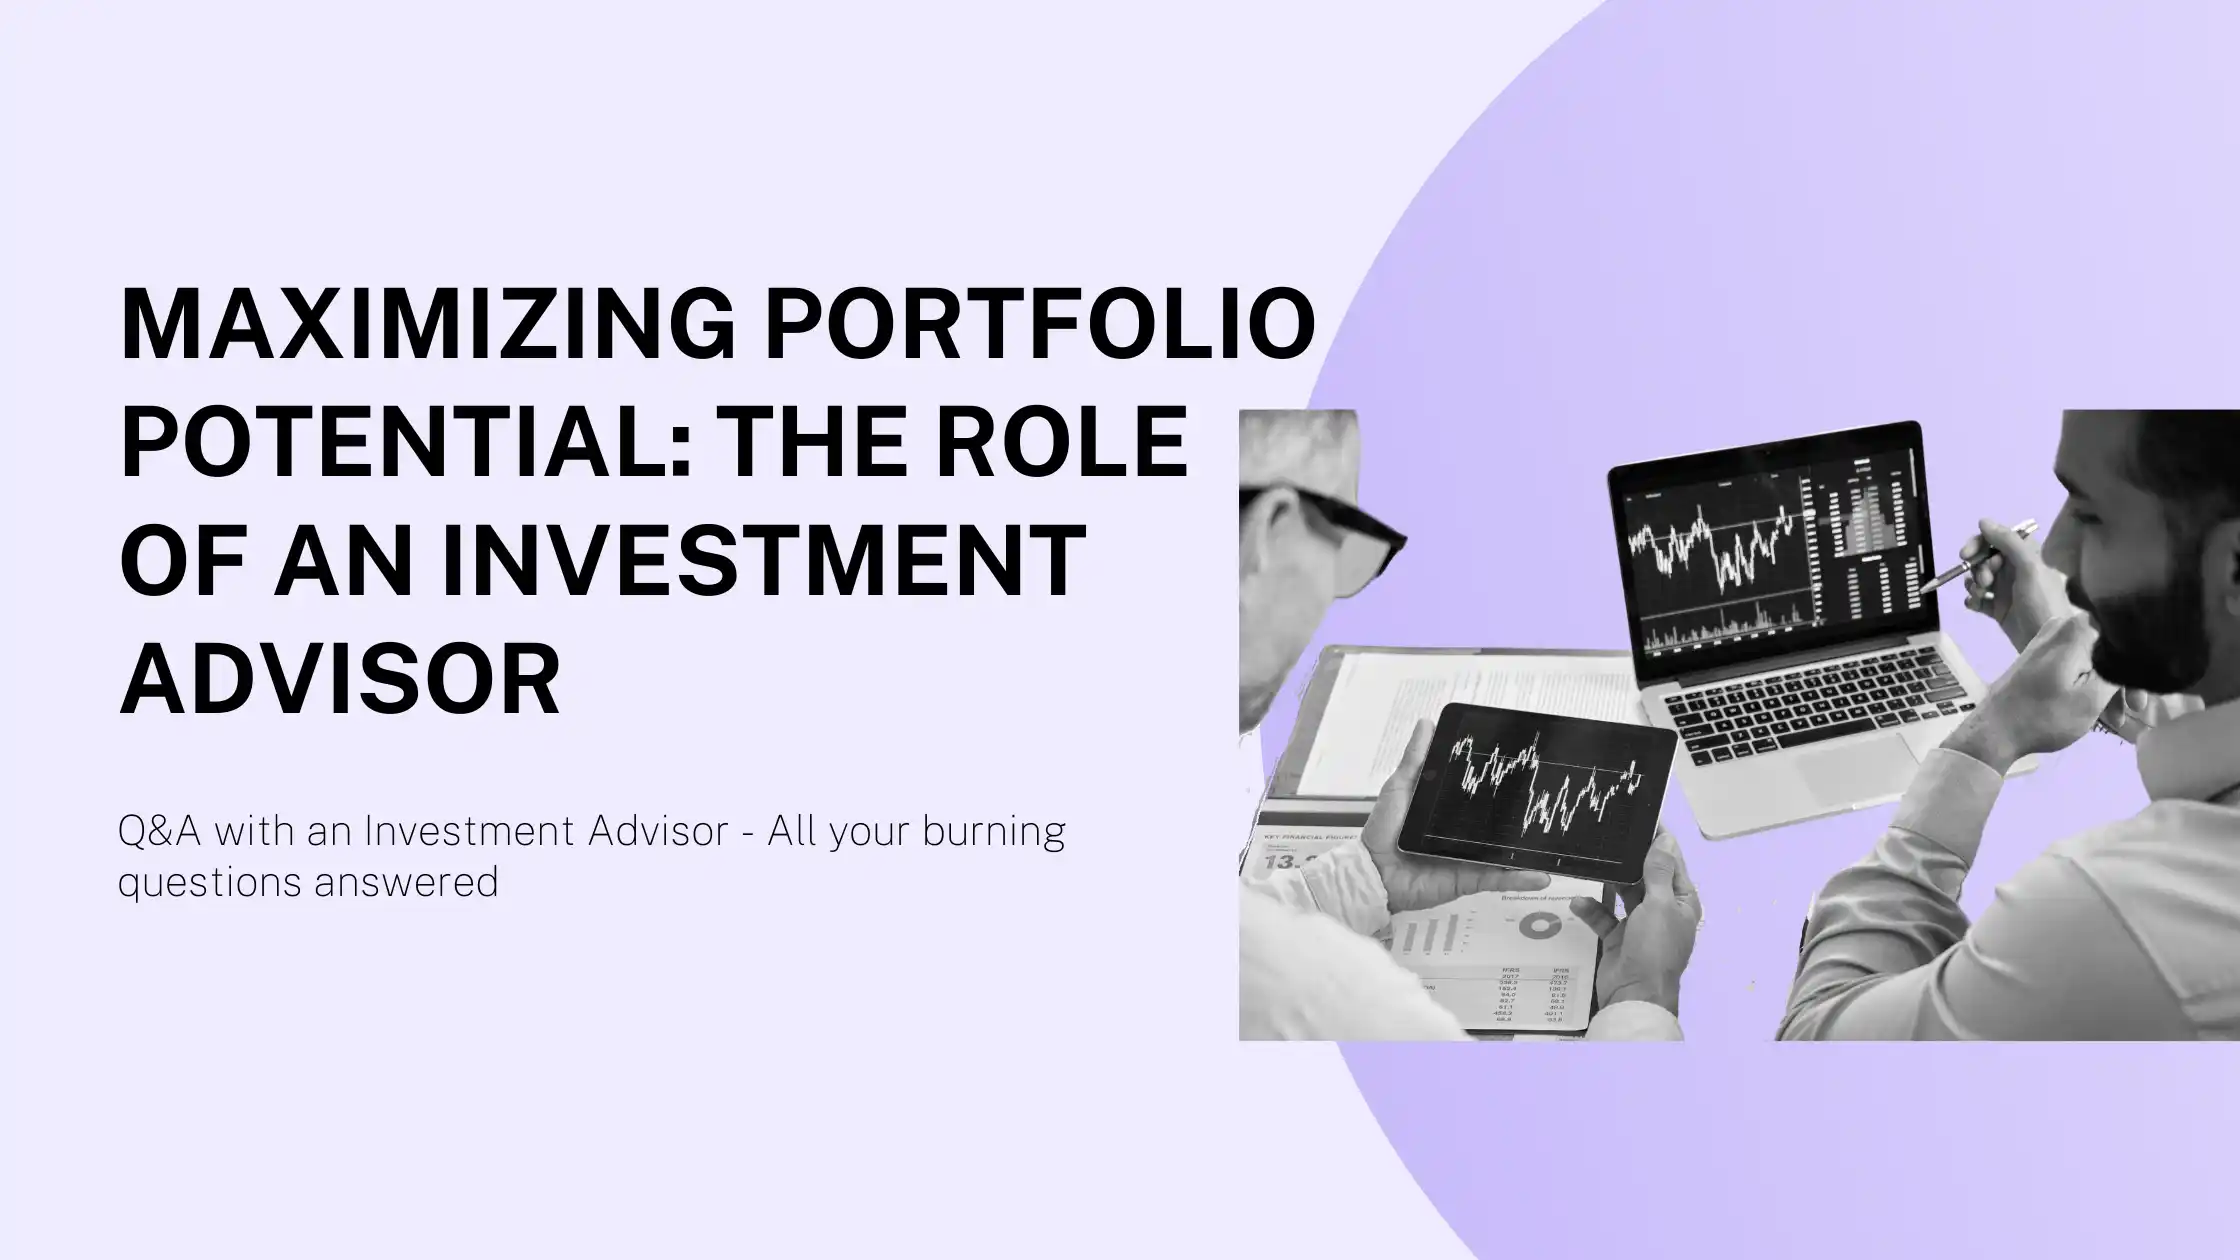 Maximizing Portfolio Potential: The Role of an Investment Advisor